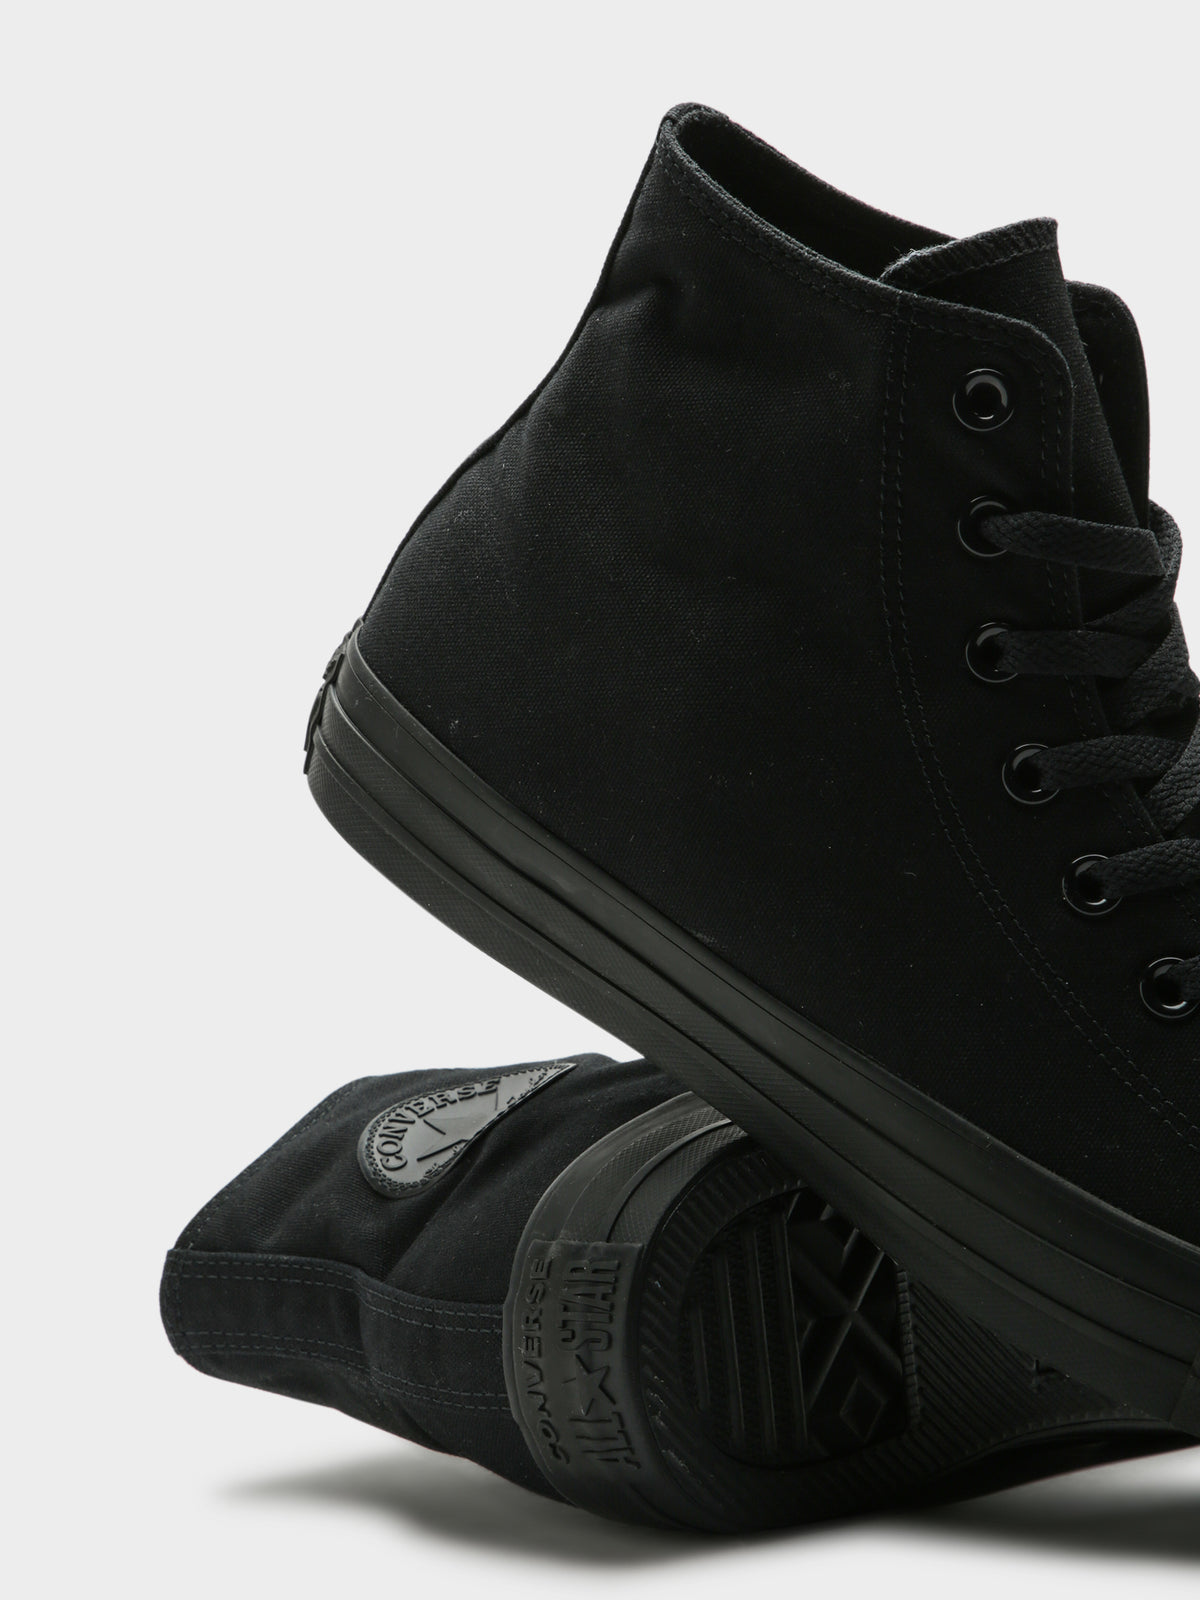 Unisex Chuck Taylor All Star Classic High-Top Sneakers in Black Canvas